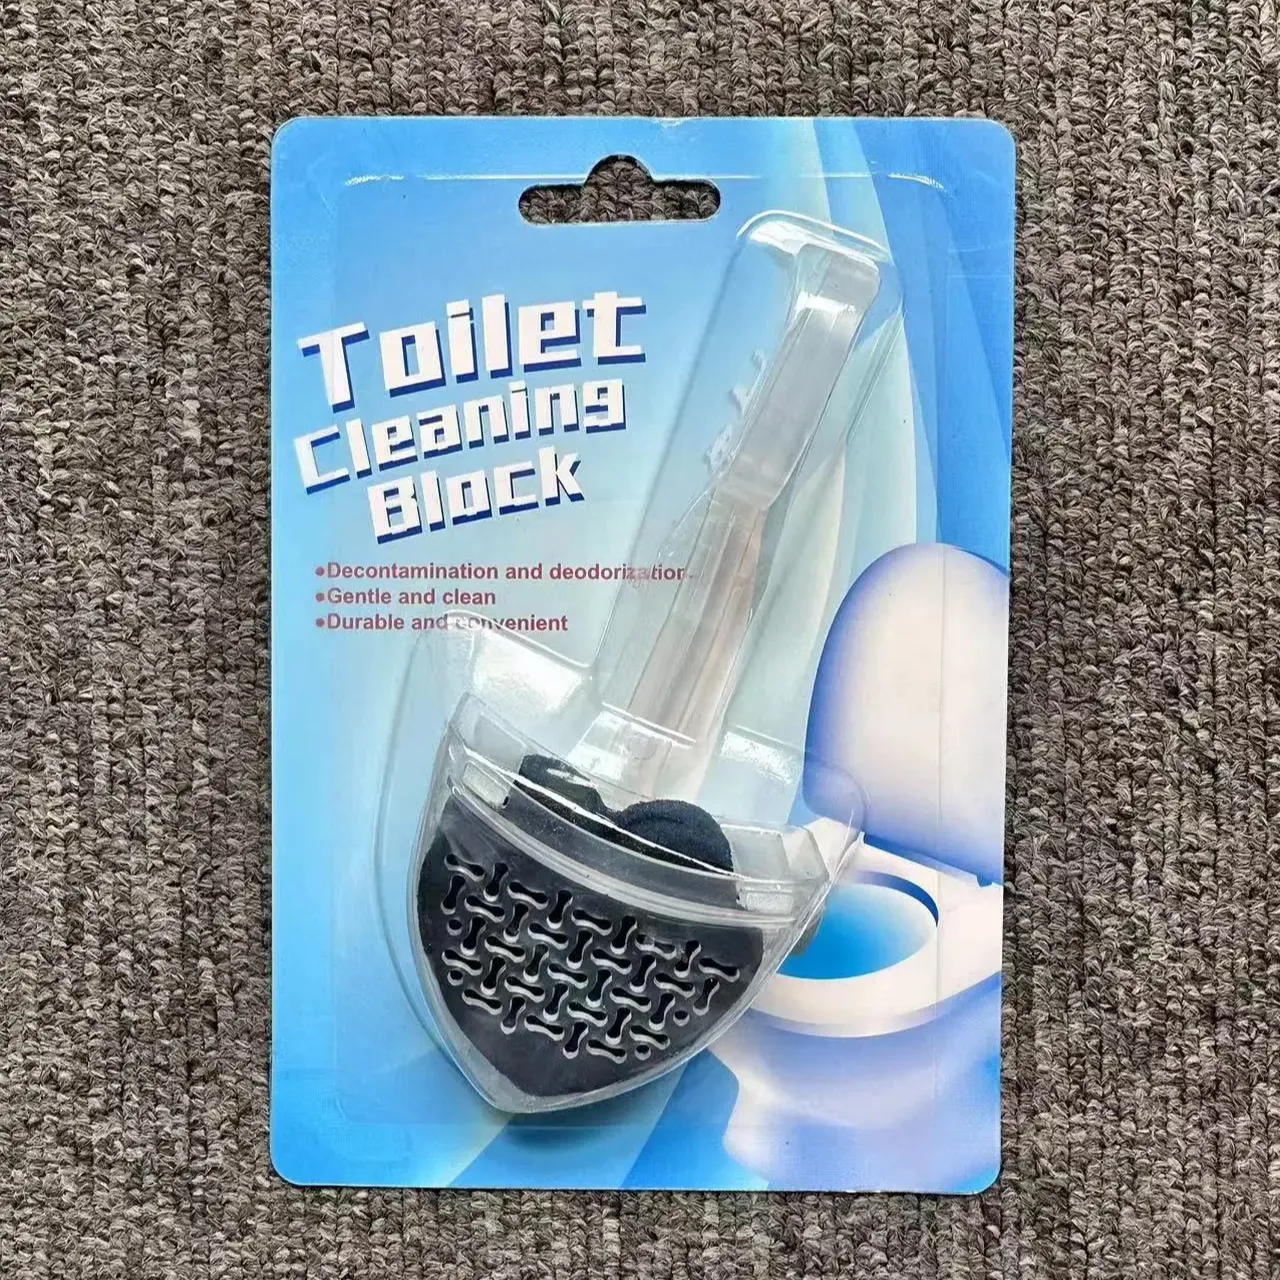 Automatic Rim Hanger Toilet Bowl Cleaner 4in1 Air Freshener With Scent